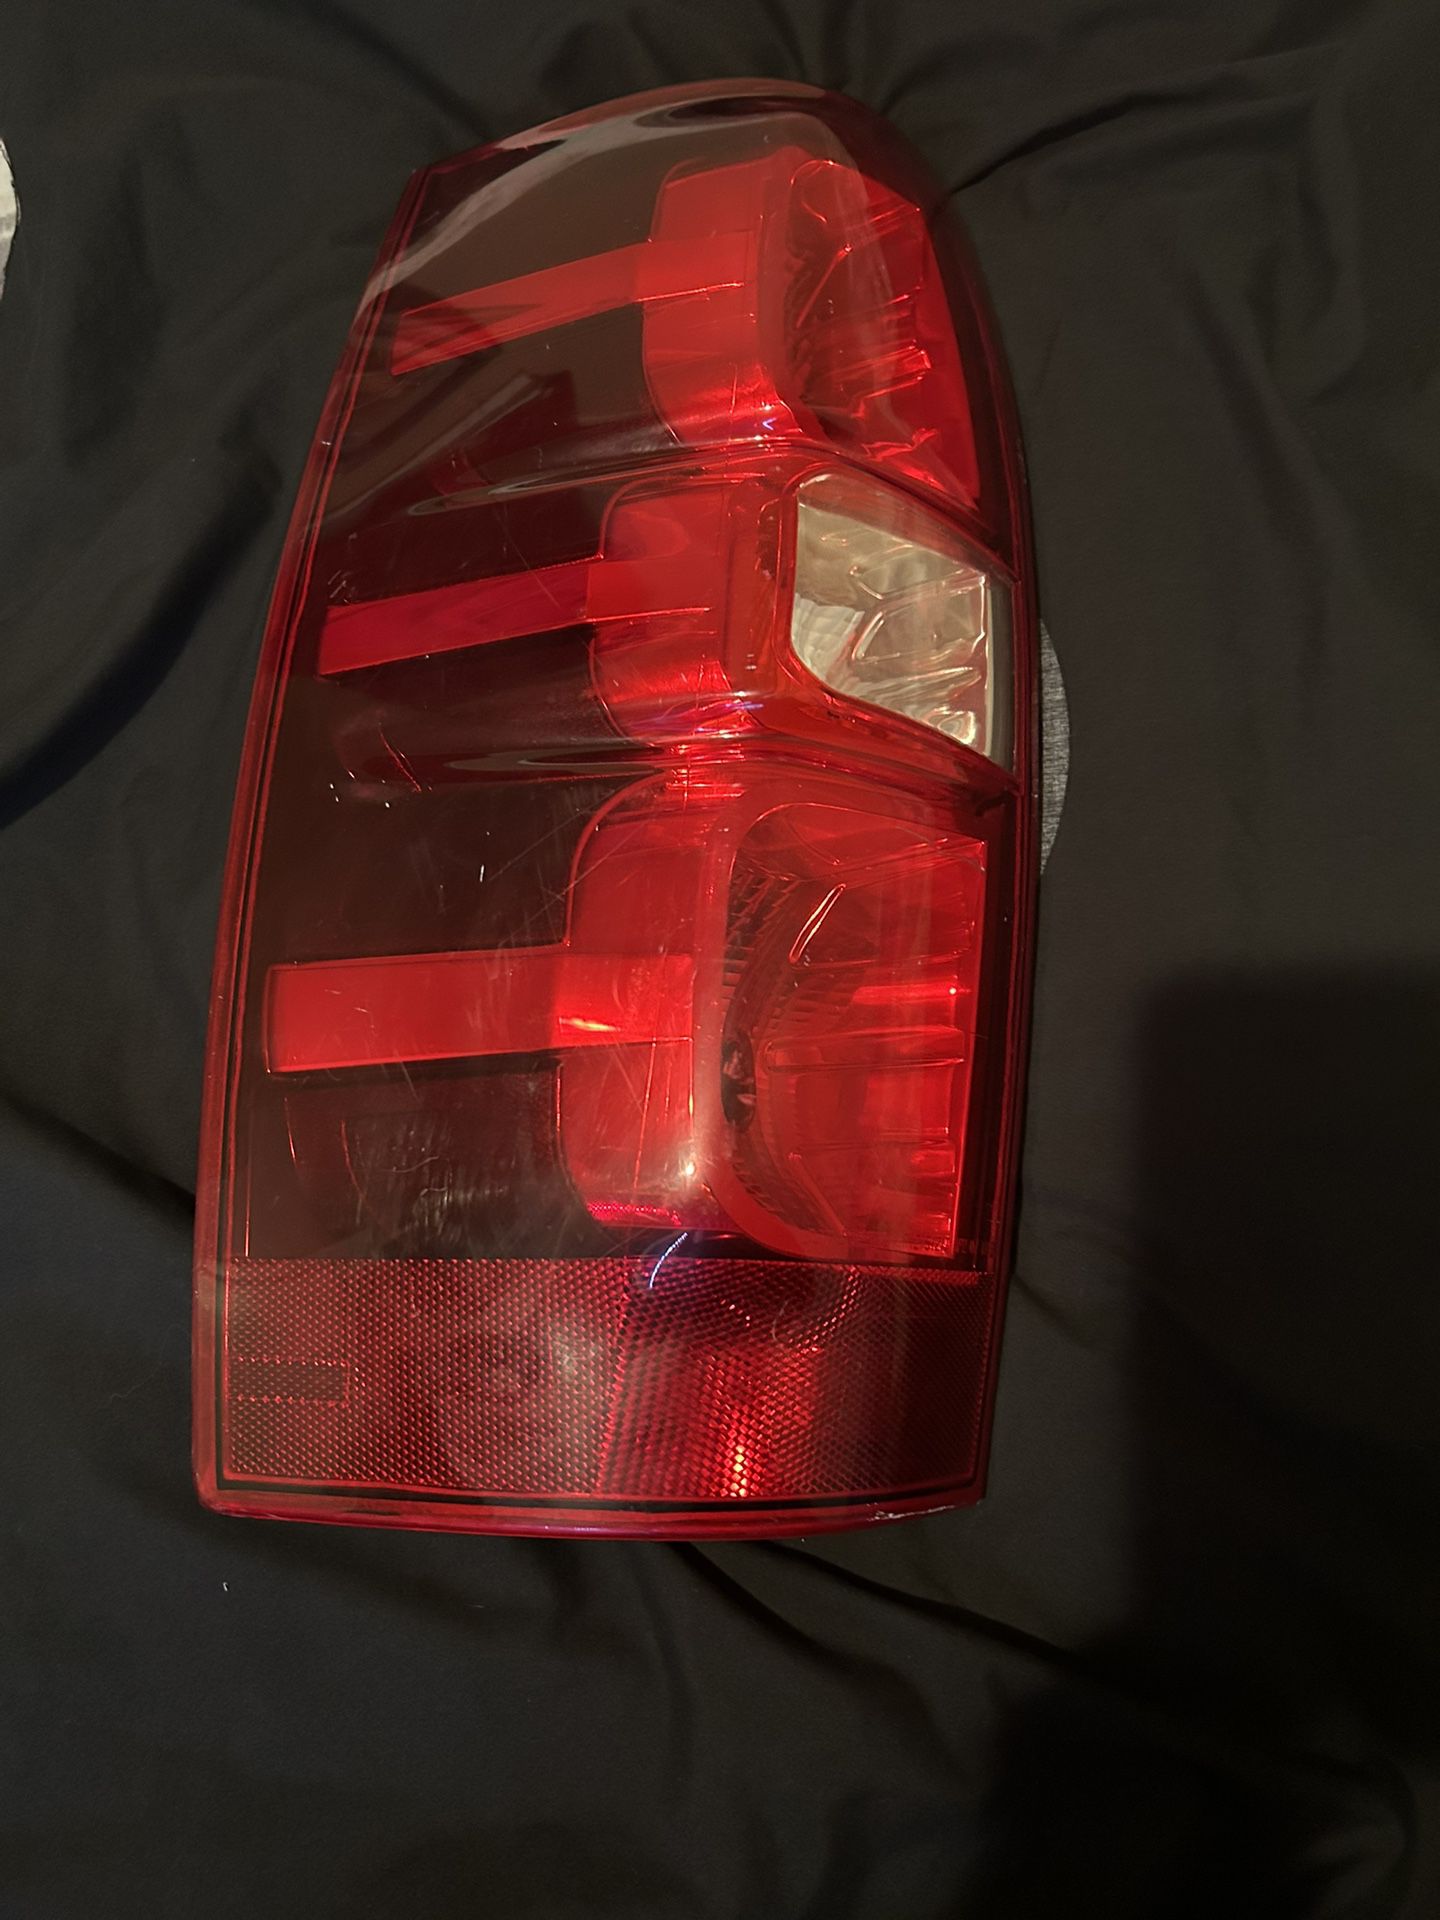 2008 Chevy Tahoe Driver side Tail Light 